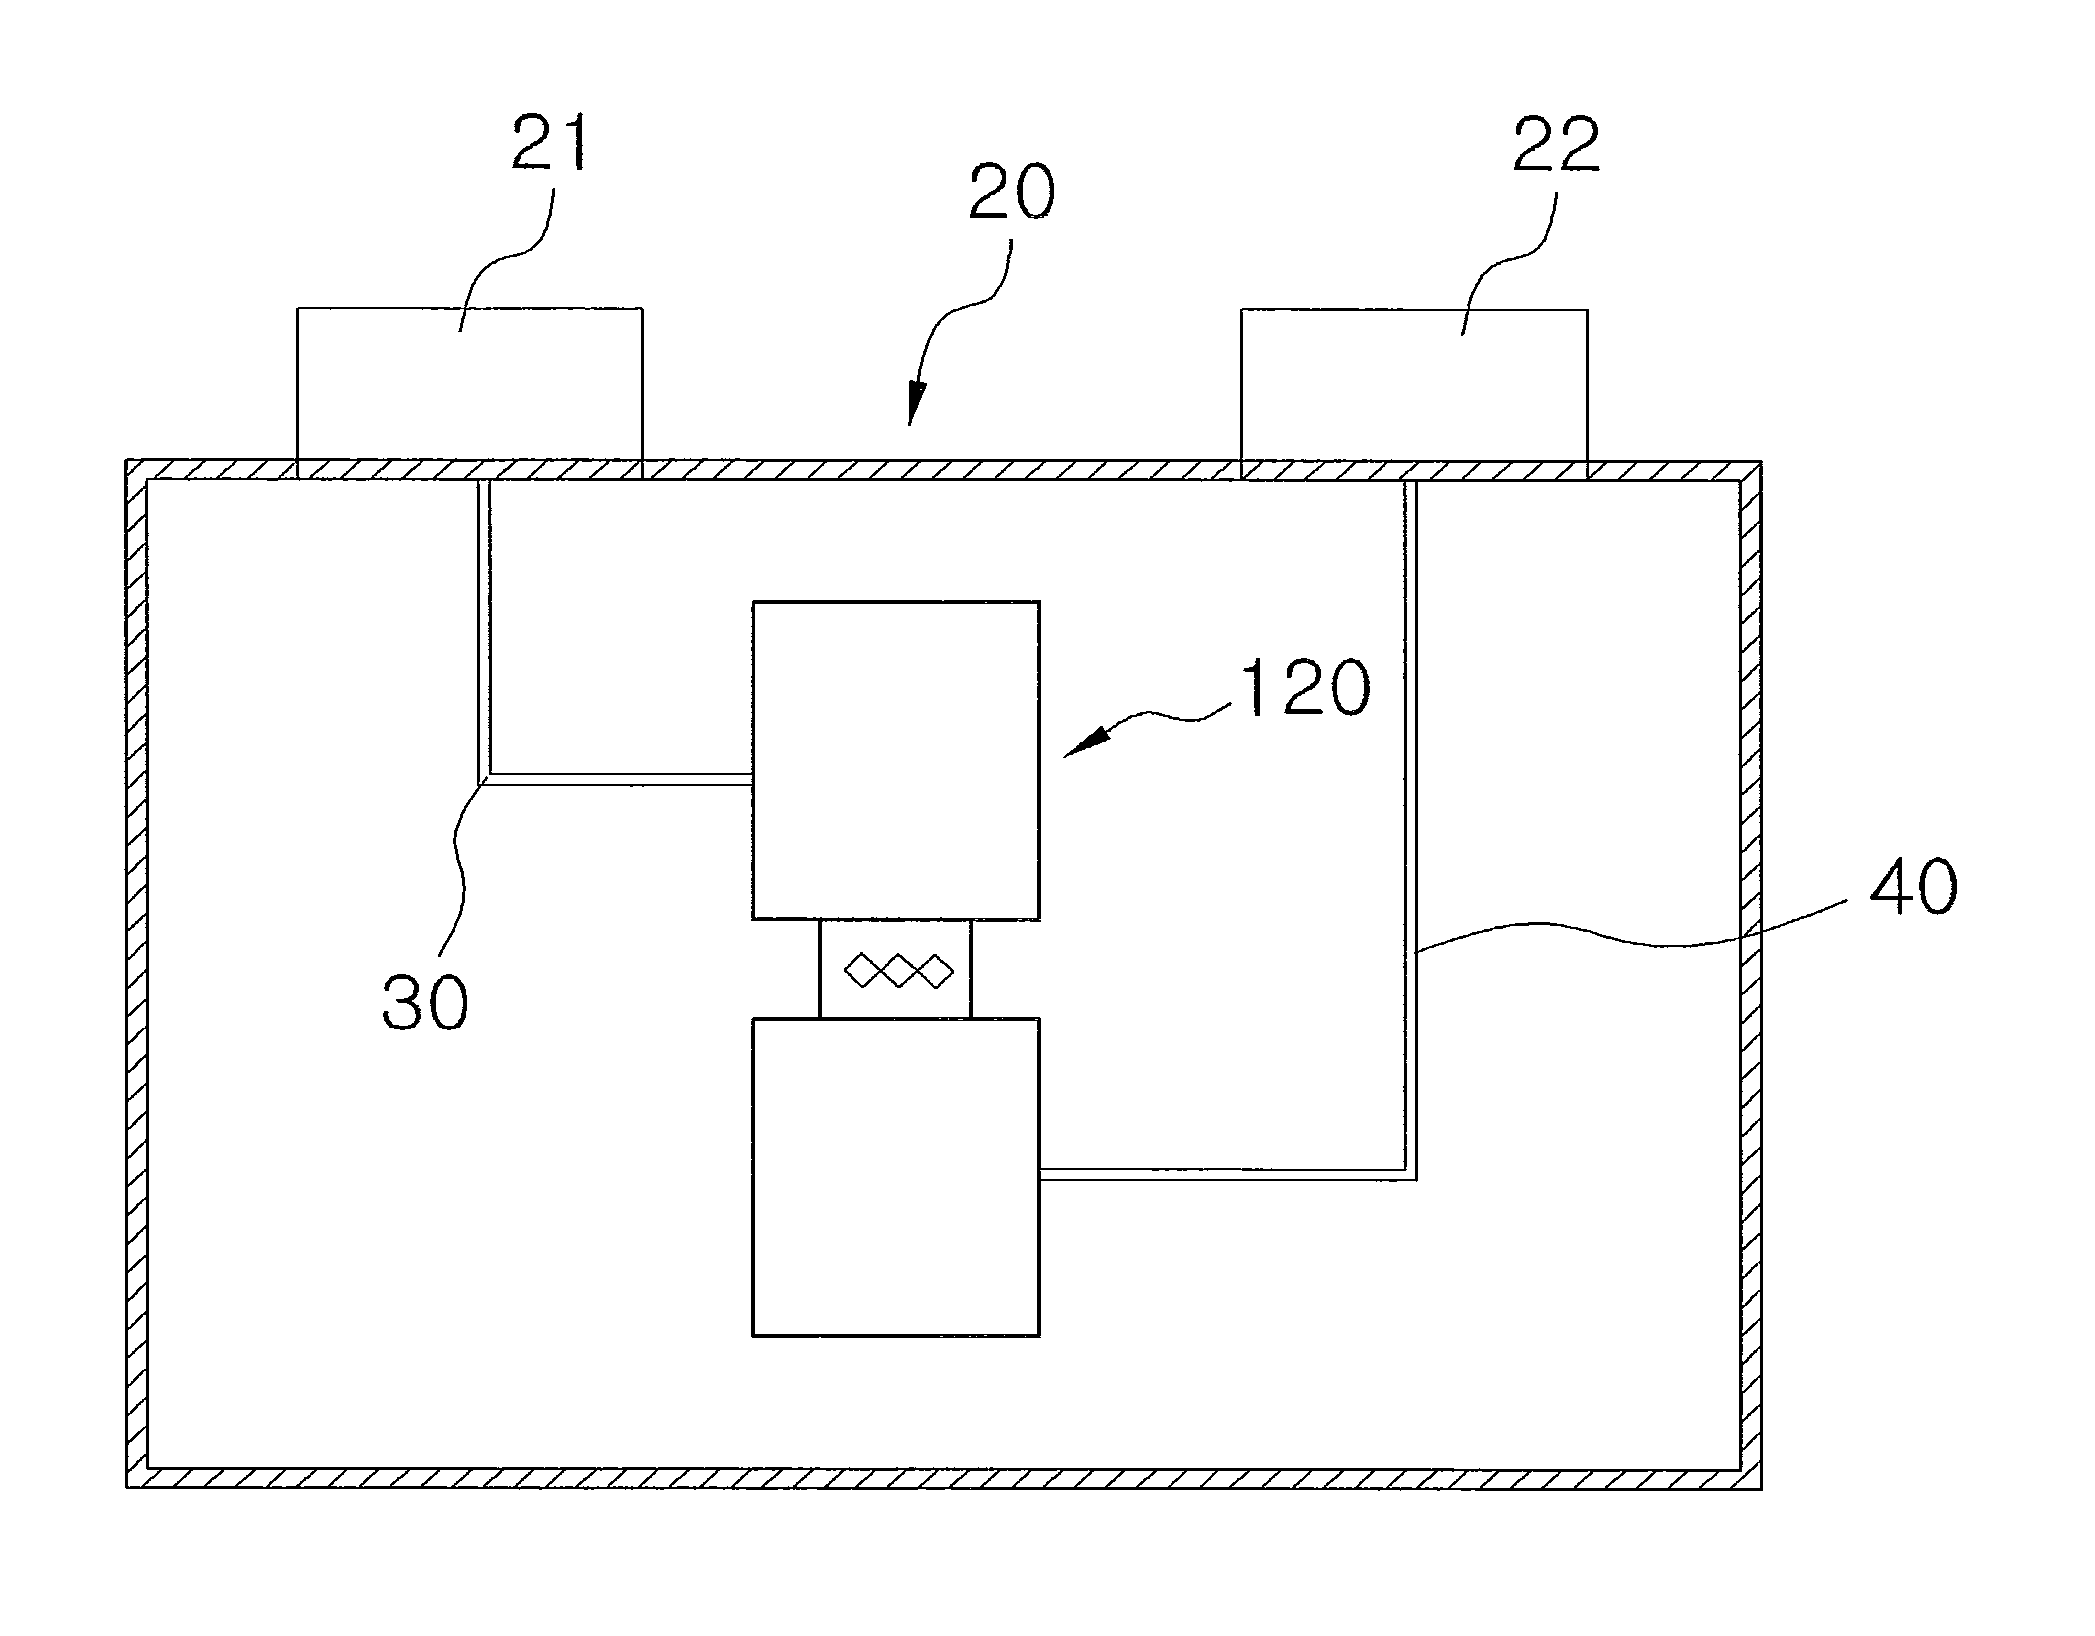 Safety Switch for Secondary Battery for Electric Vehicle and Charging Discharging System for Secondary Battery for Electric Vehicle Using the Same